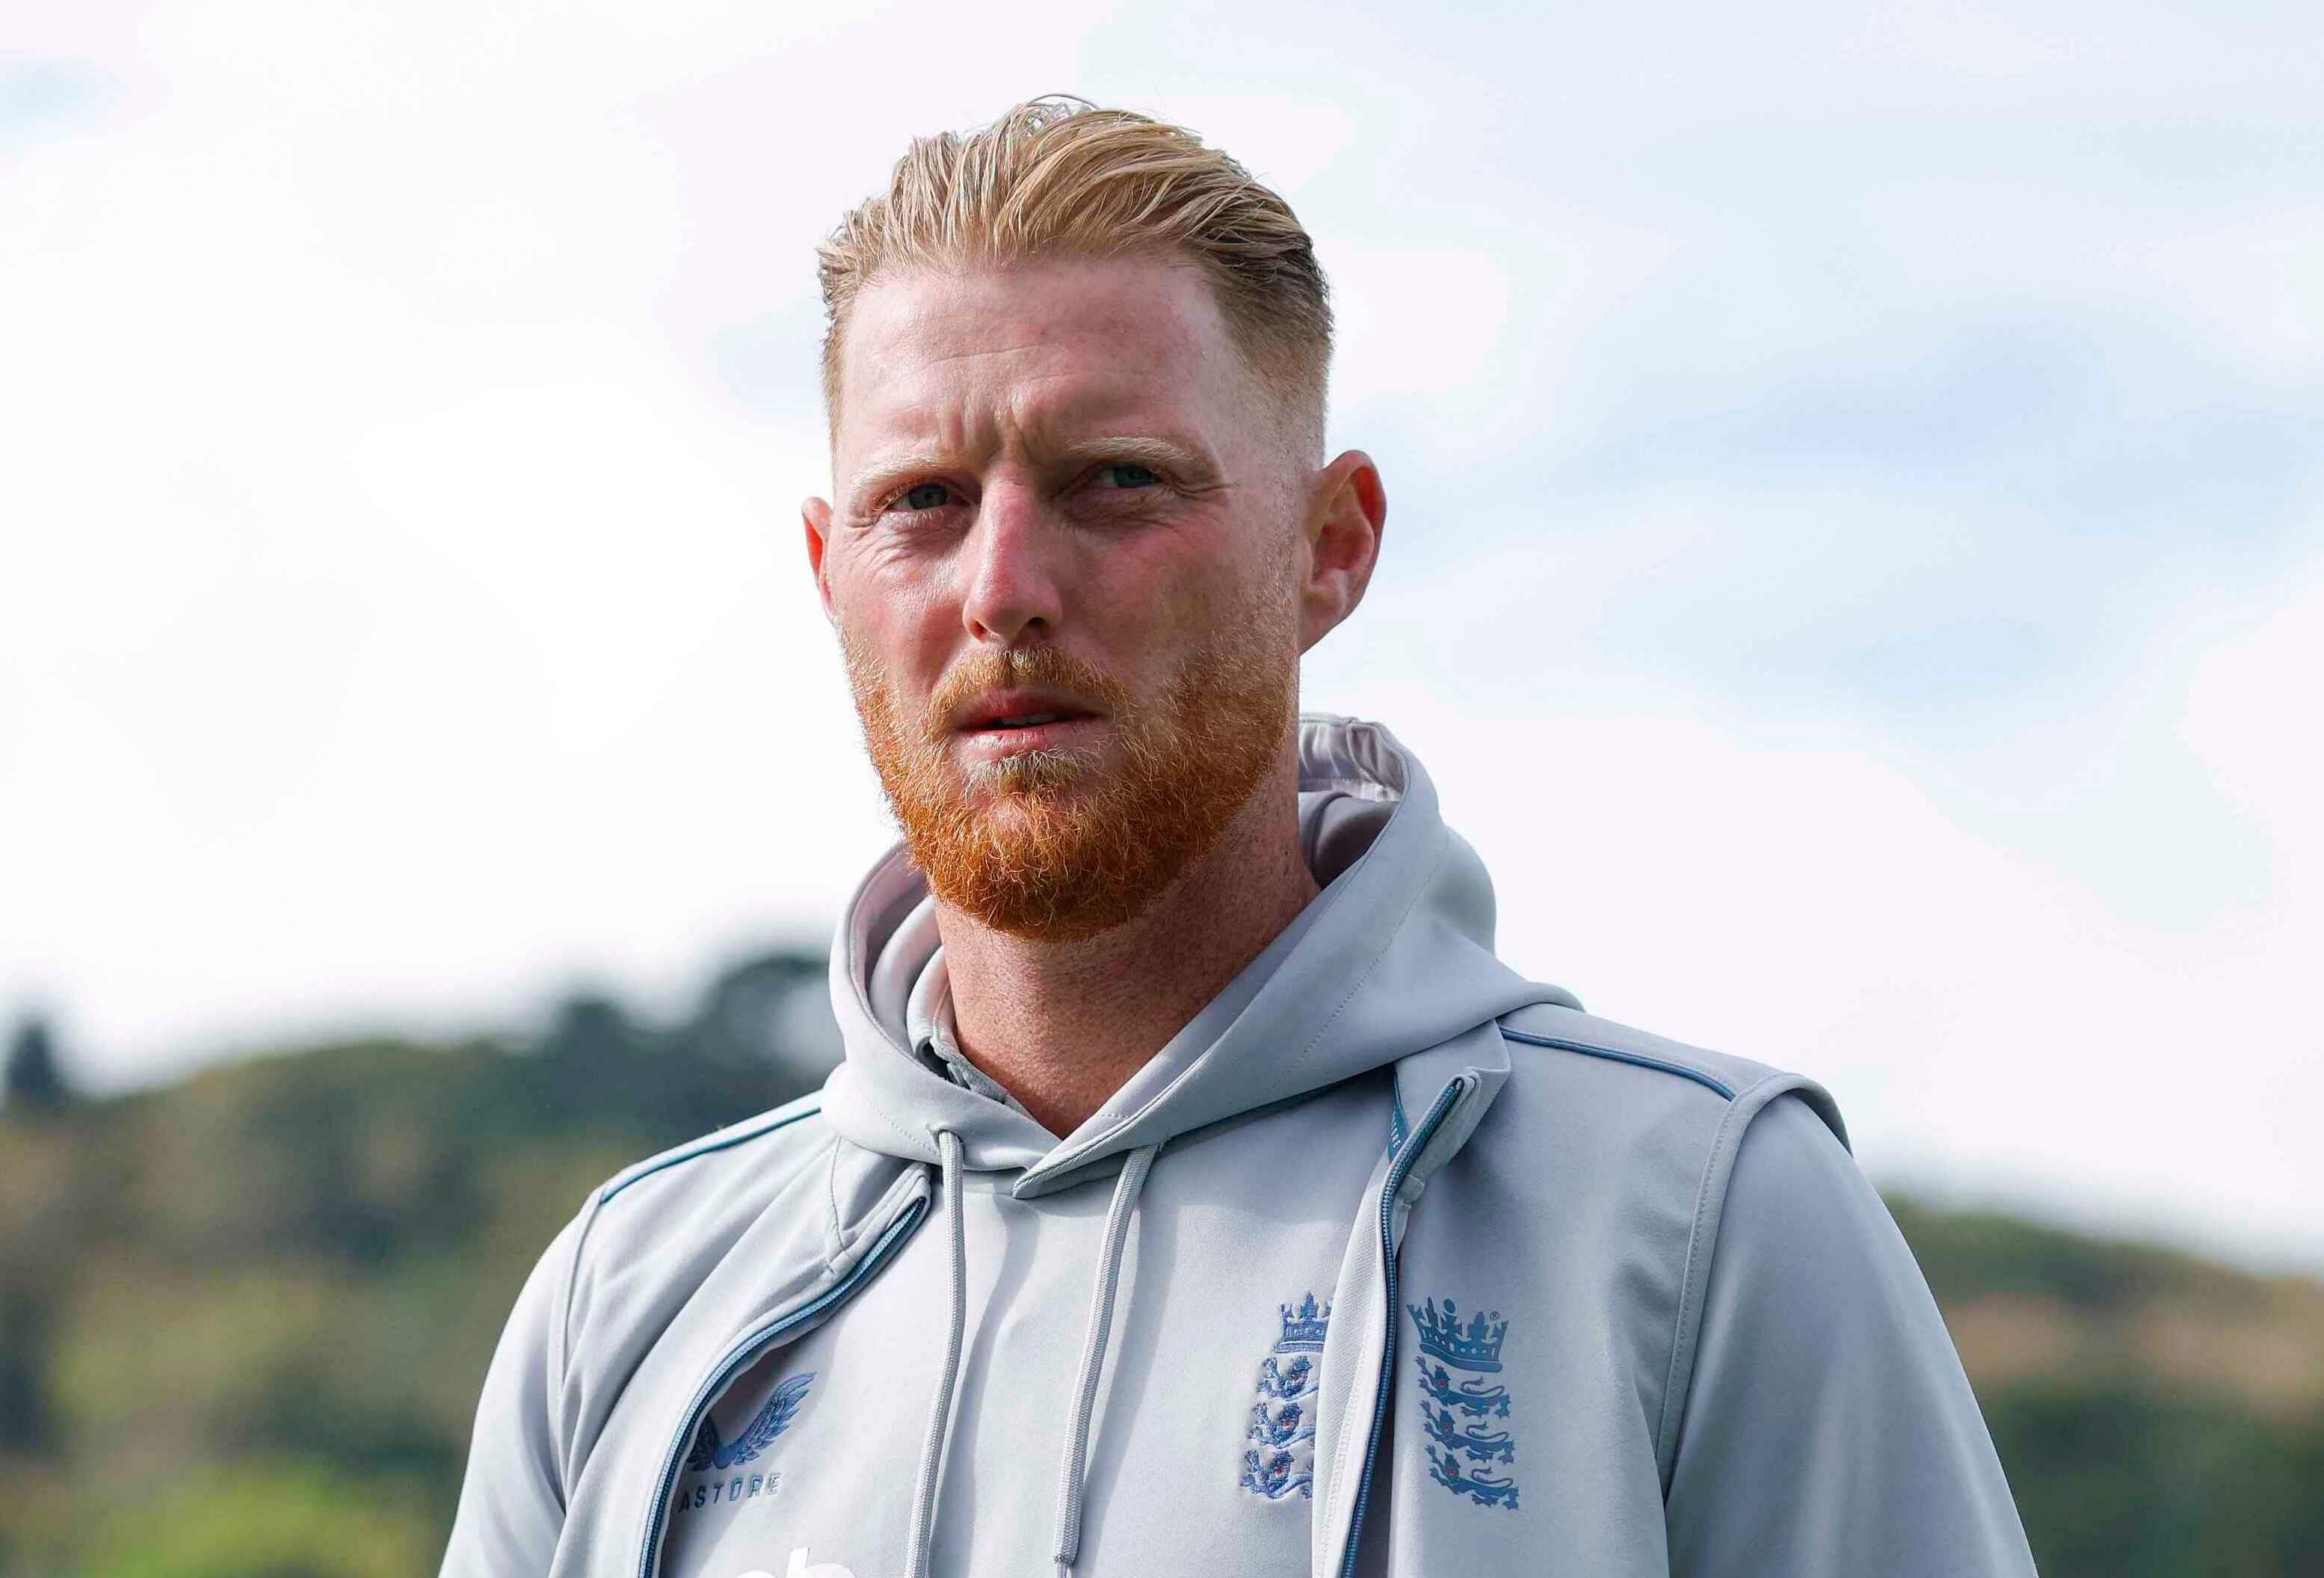 'I Have Definitely Given Myself The Best Opportunity To Bowl This Summer' - Ben Stokes